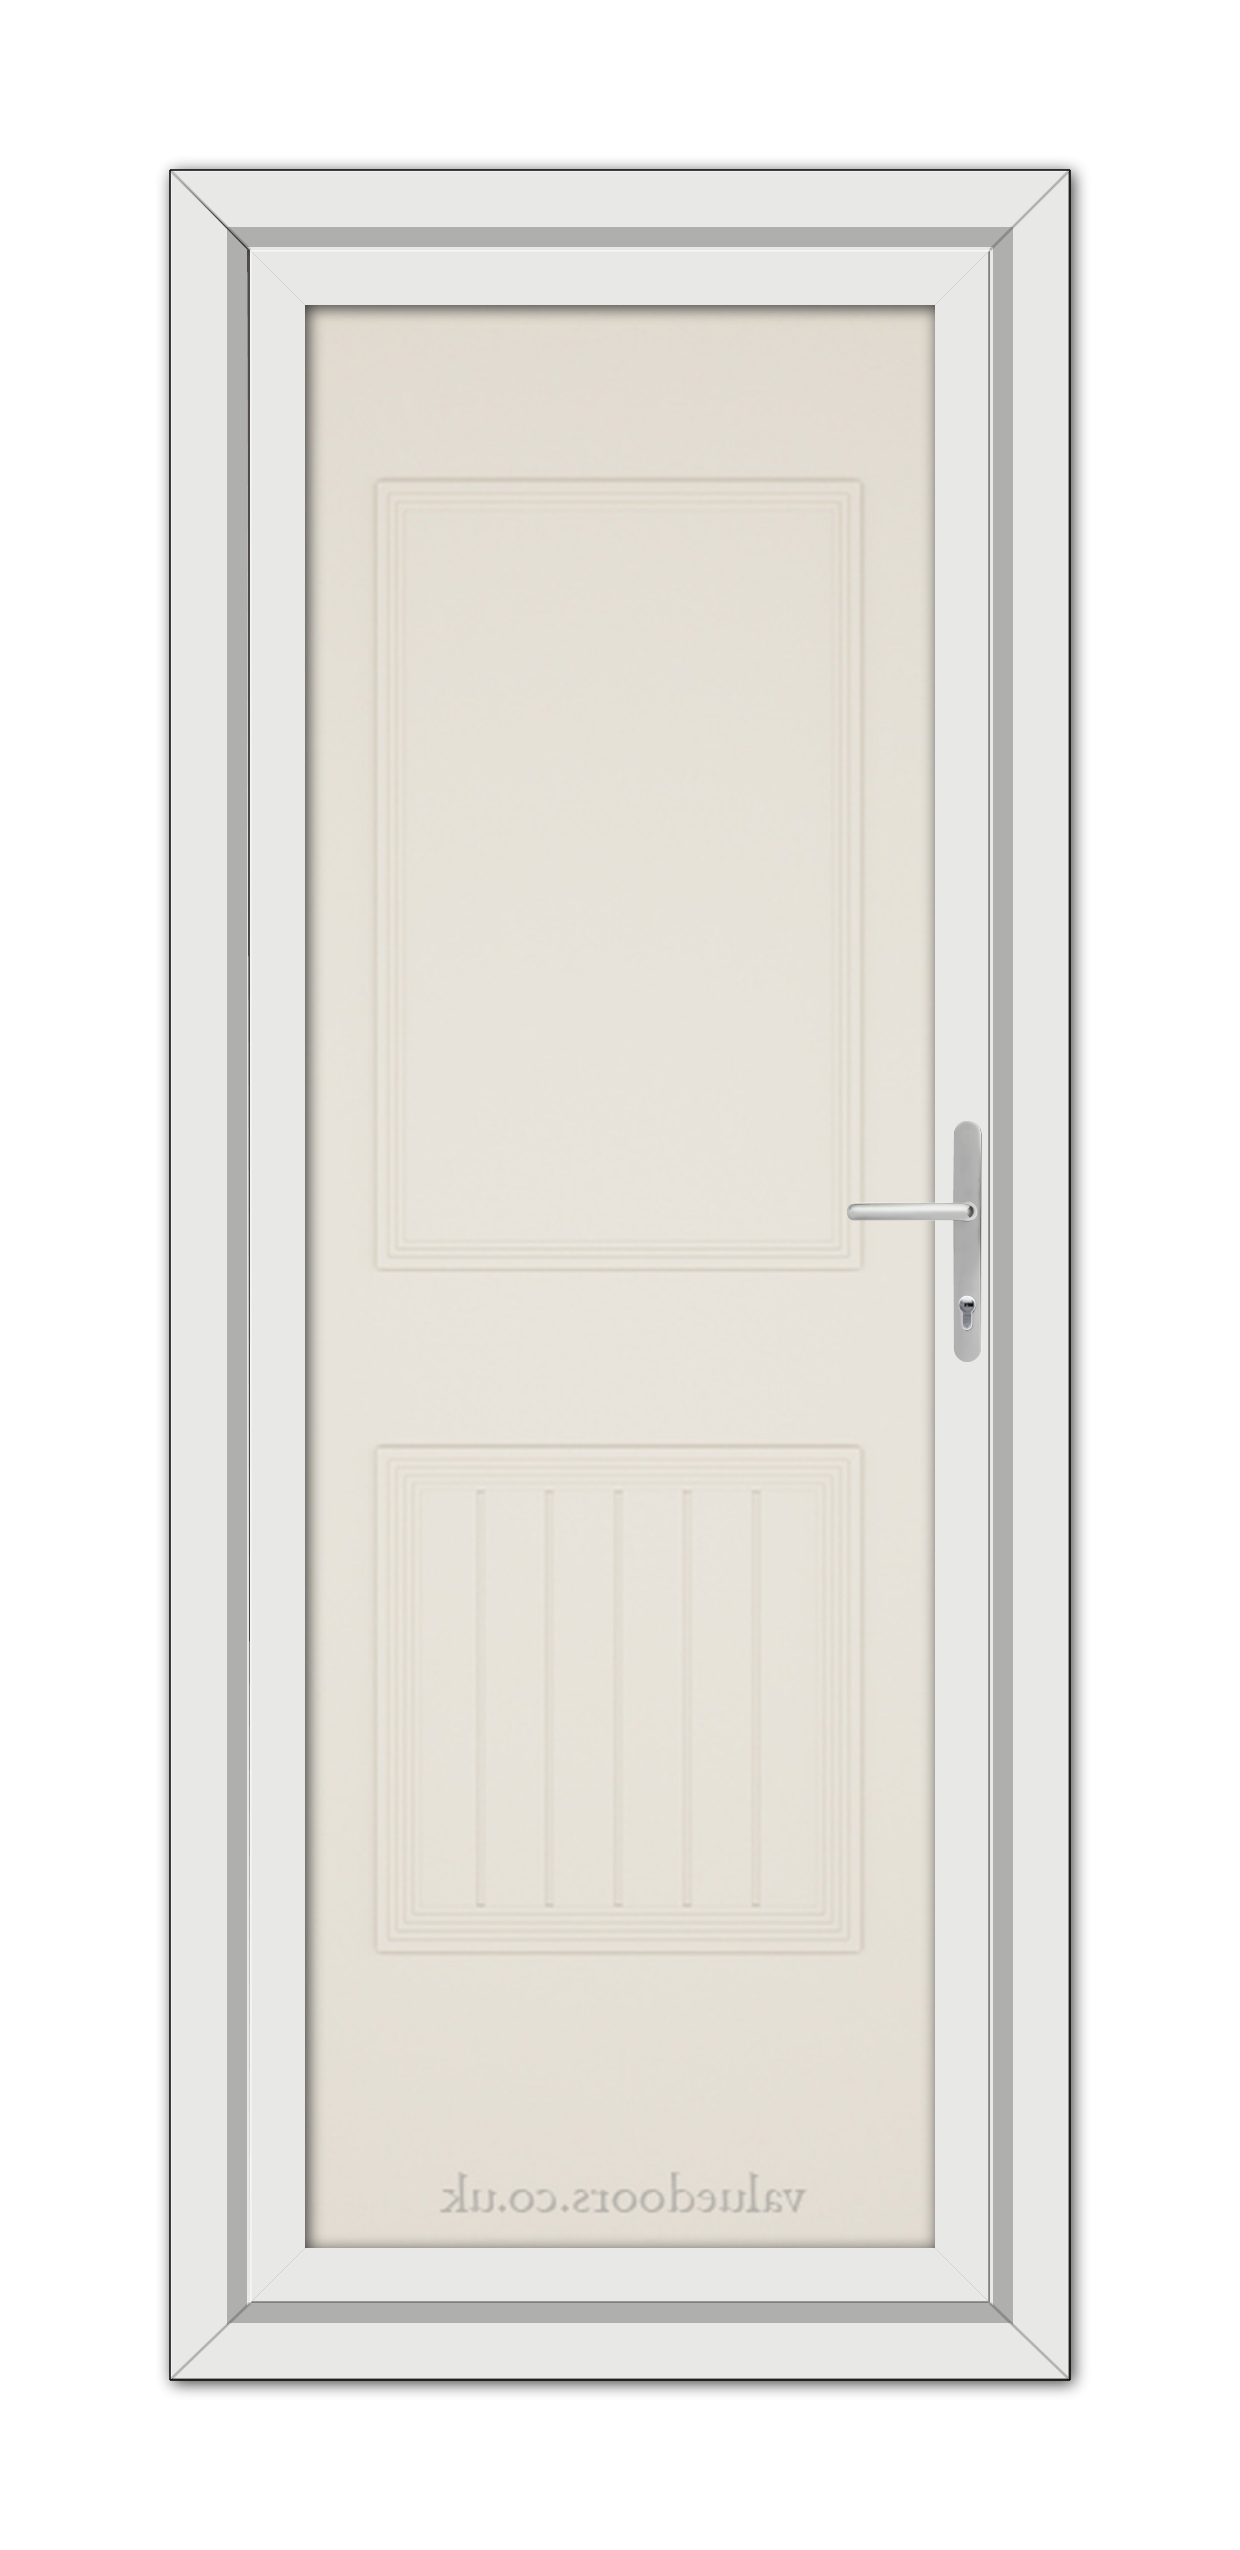 A vertical image of a closed Cream Alnwick One Solid uPVC Door with a silver handle, set within a gray frame, viewed from the front.